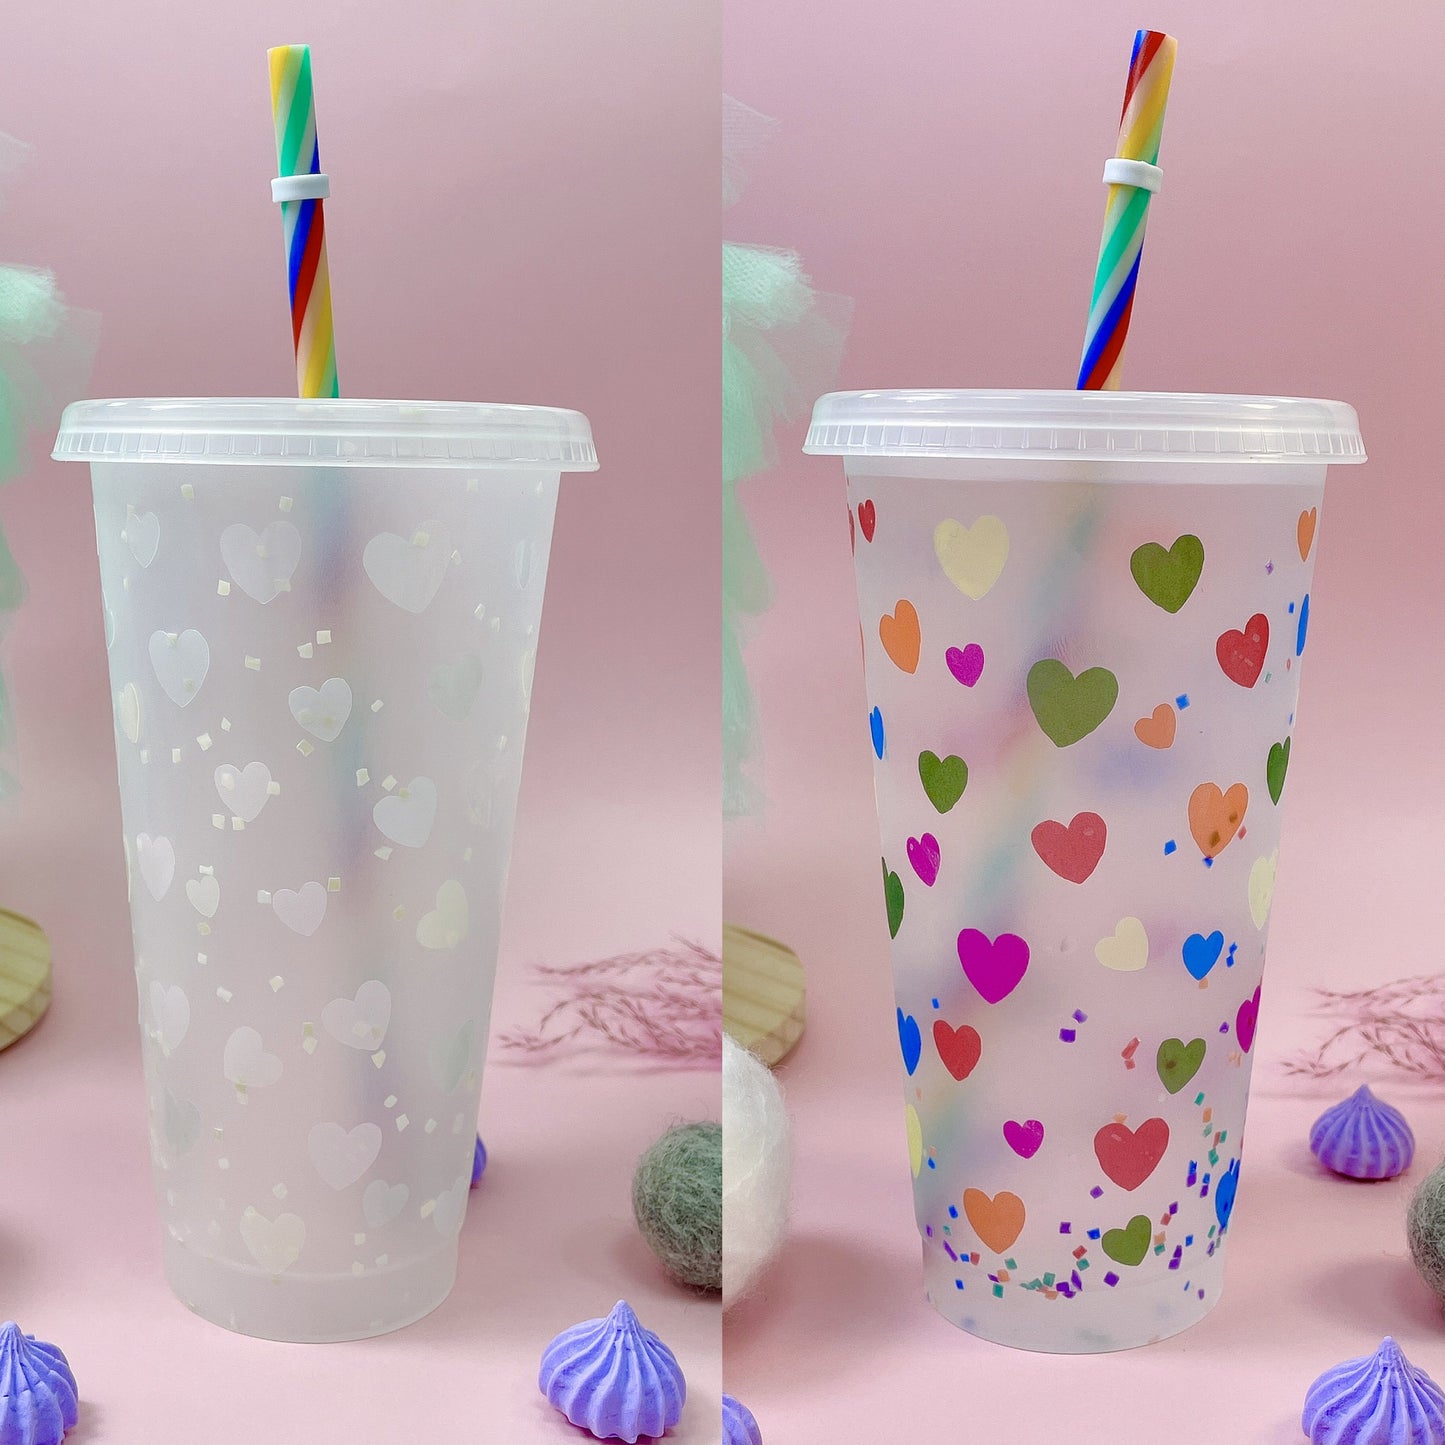 CLEAR COLD Colour Changing Adhesive Vinyl (TeckwrapCraft) Perfect for the Clear Cups!